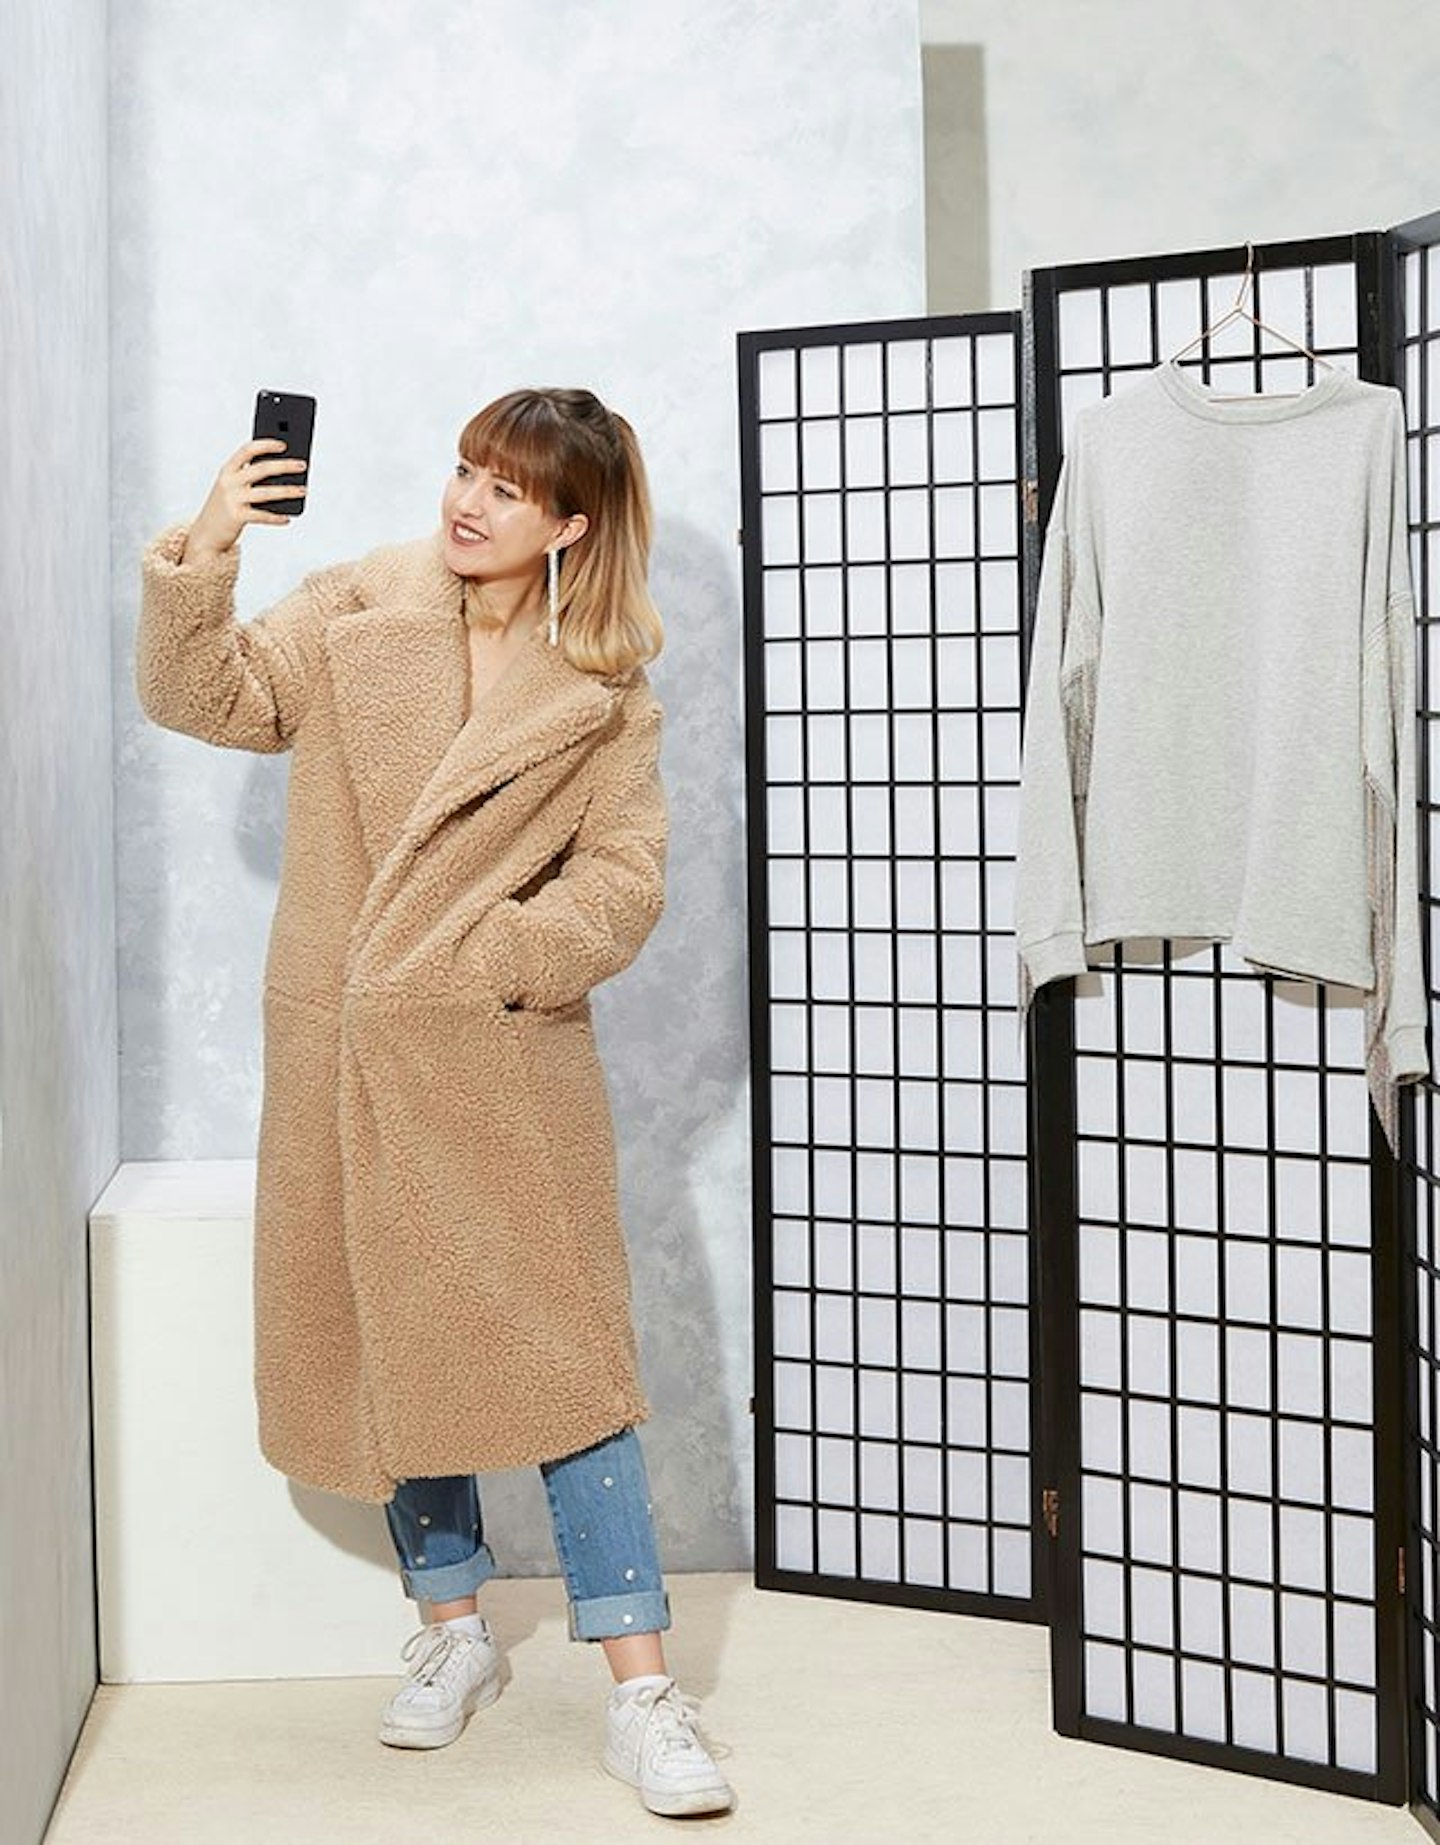 Changing-room-selfies-h-and-m-fashon-brands-high-street-The-Coat